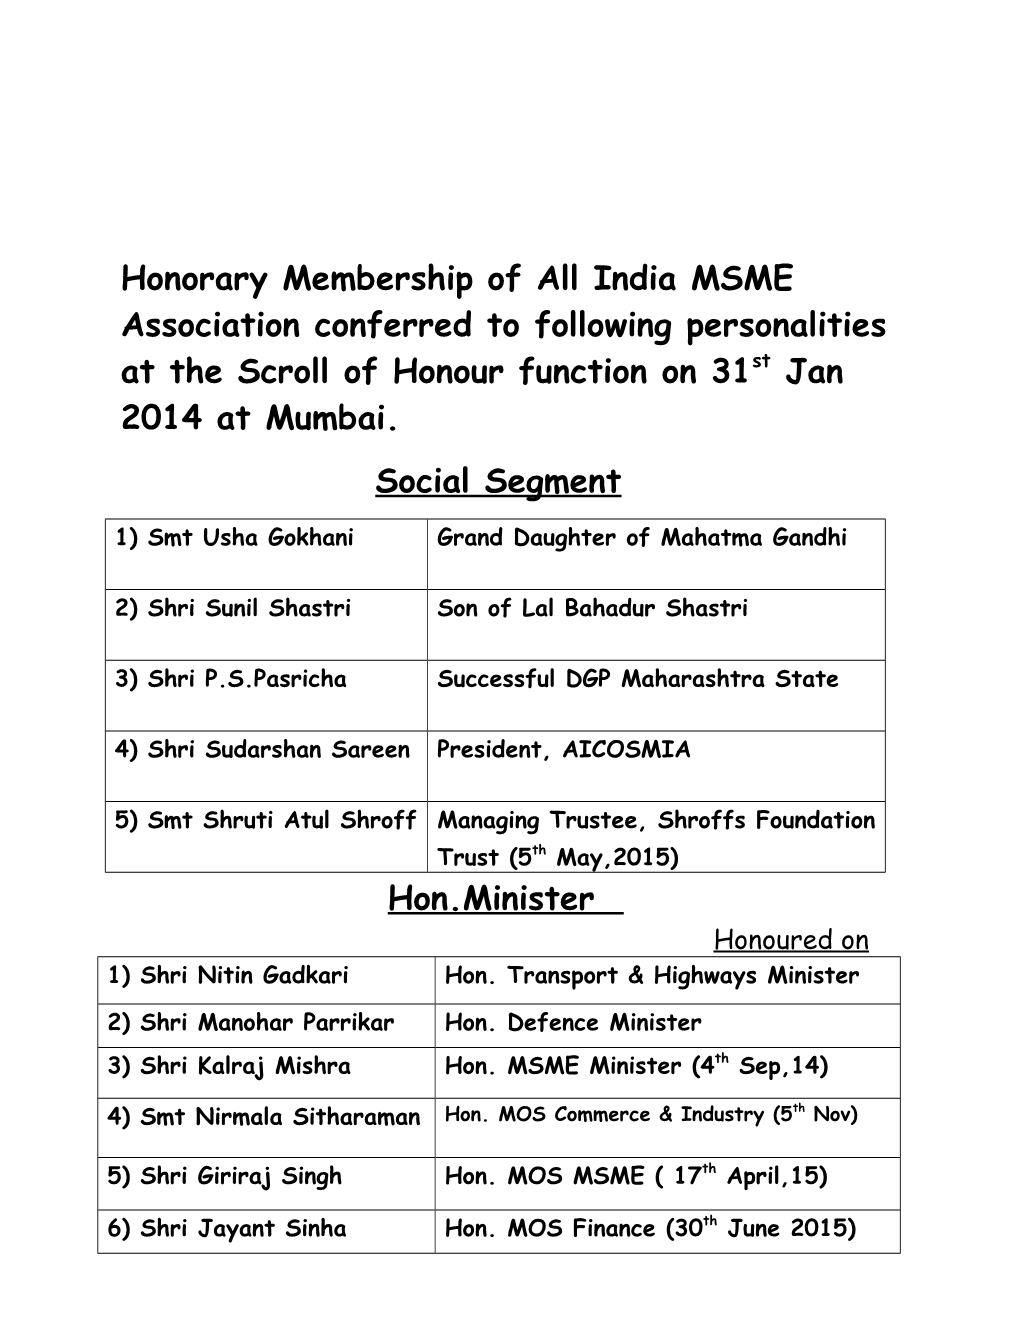 Honorary Membership of All India MSME Association Conferred to Following Personalities at the Scroll of Honour Function on 31St Jan 2014 at Mumbai